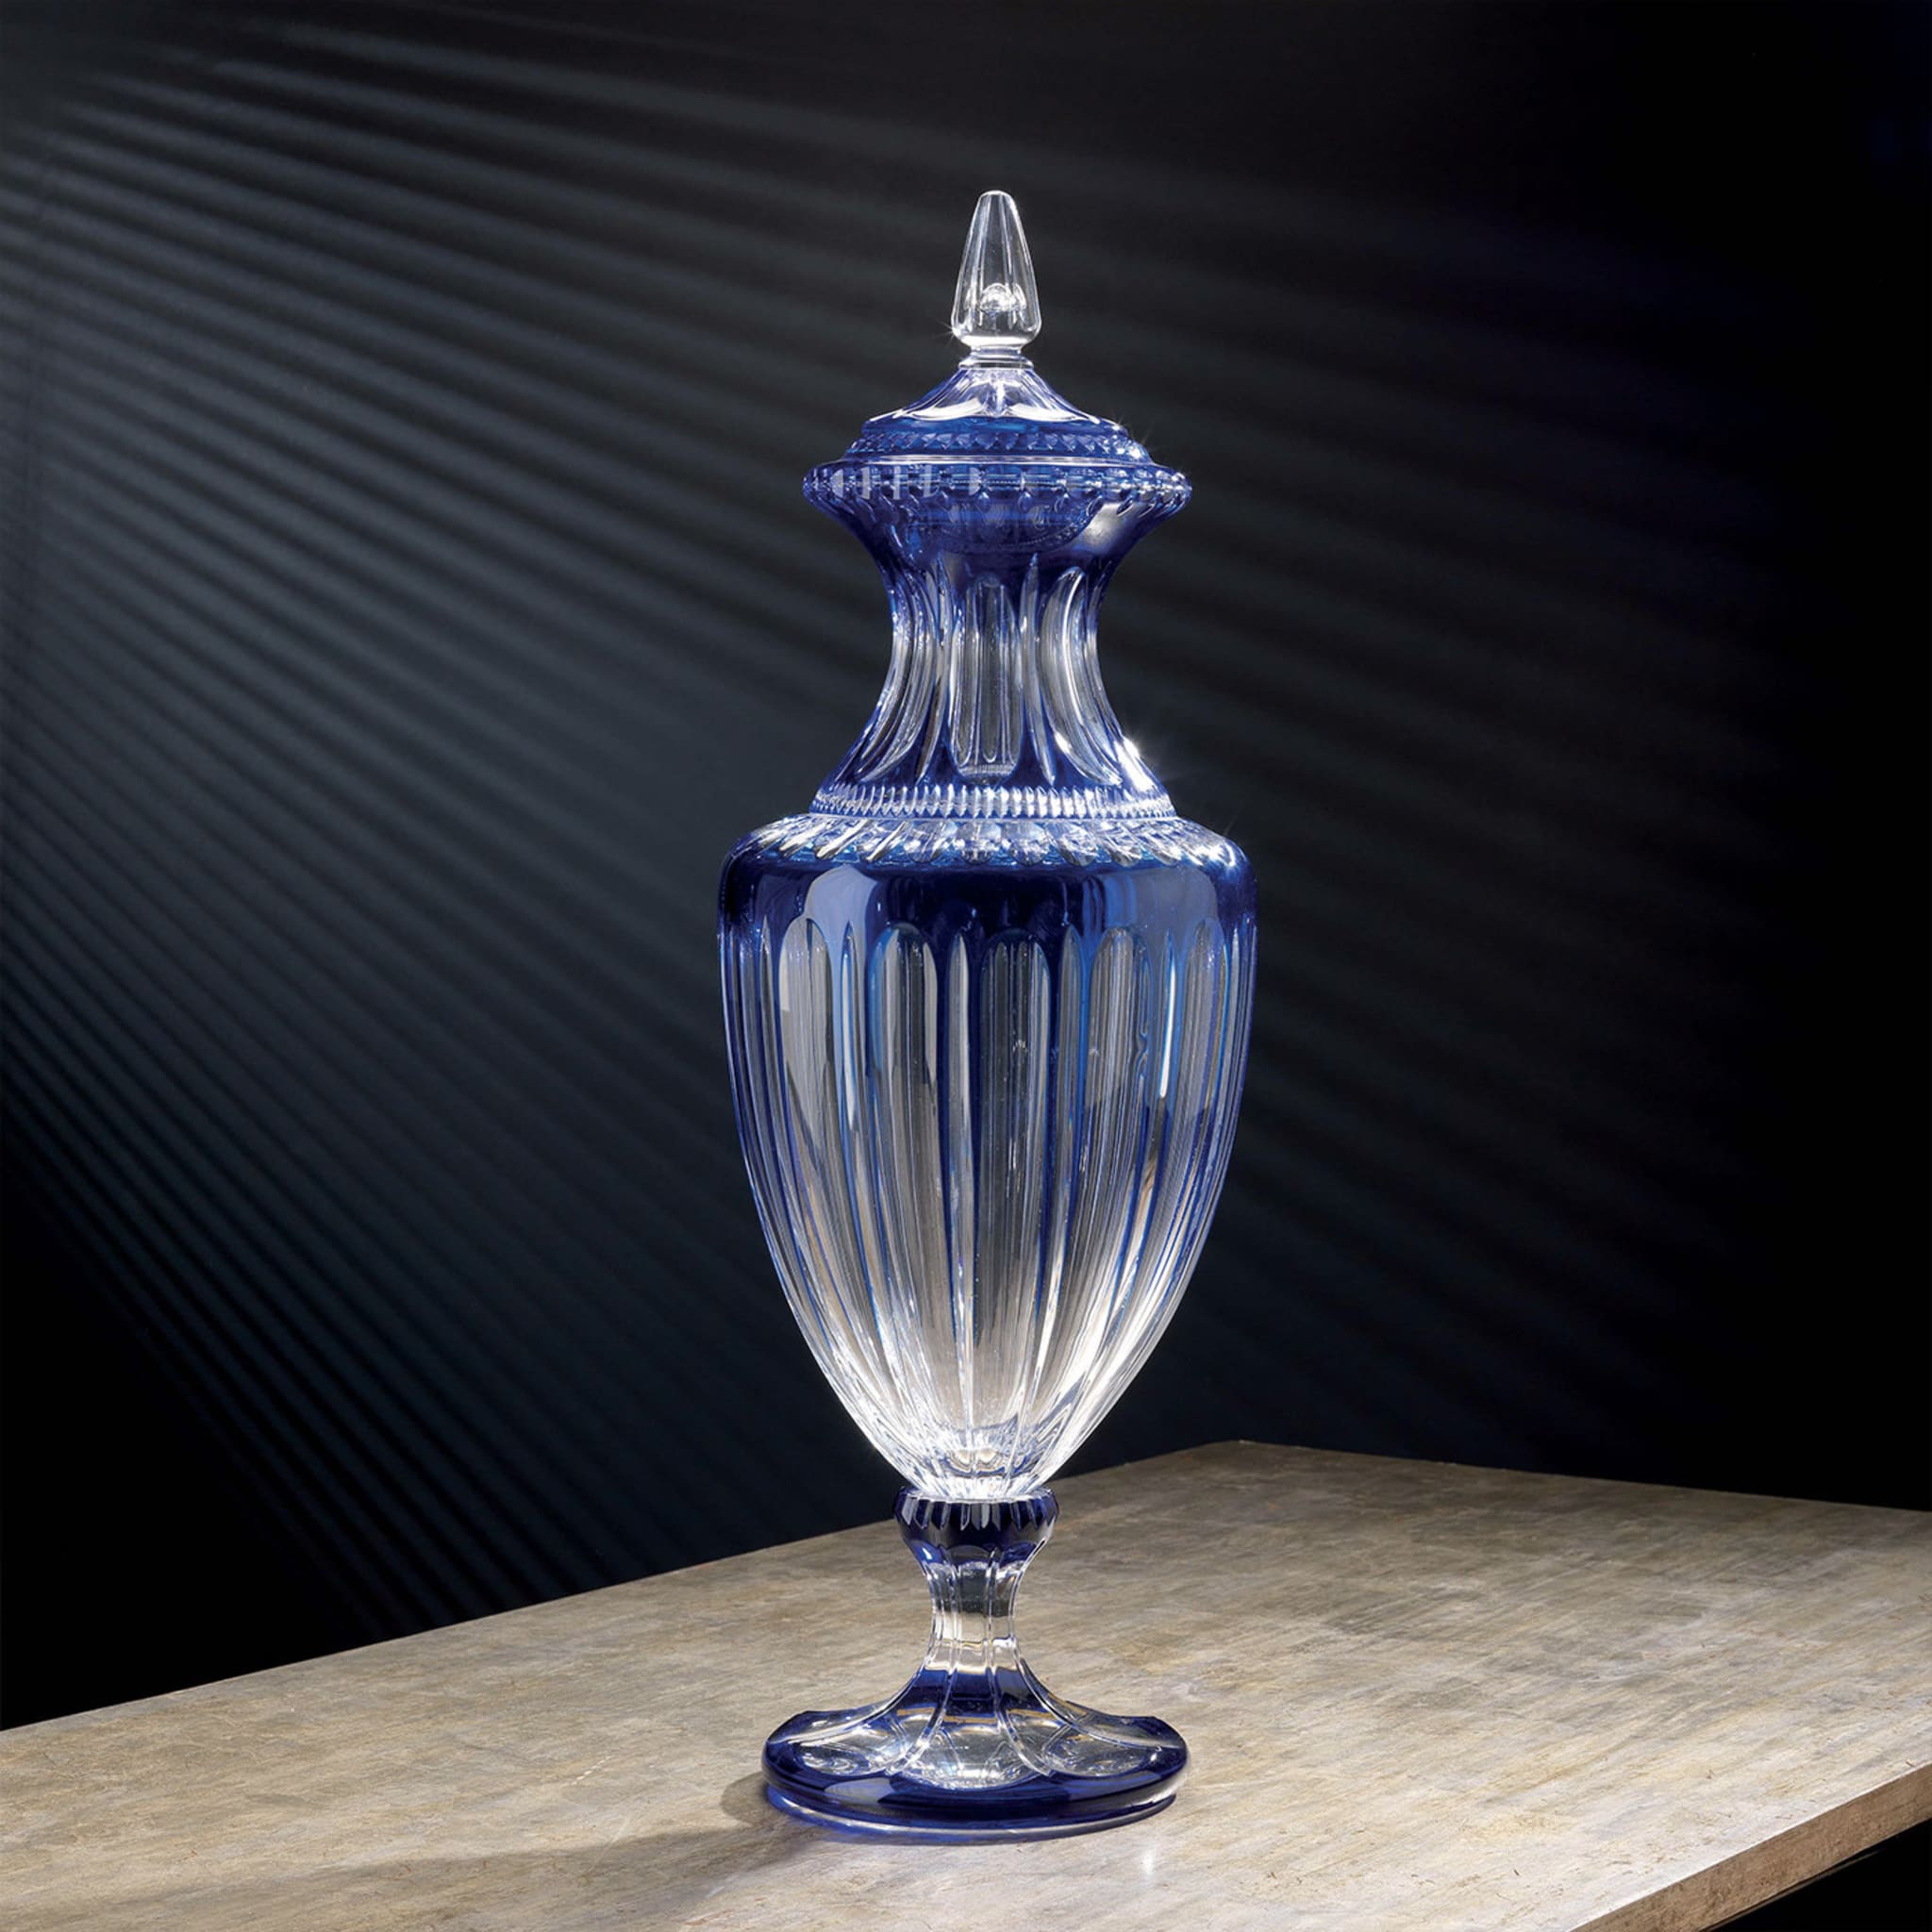 Amphora Crystal Vase in Amber and Blue - Alternative view 1